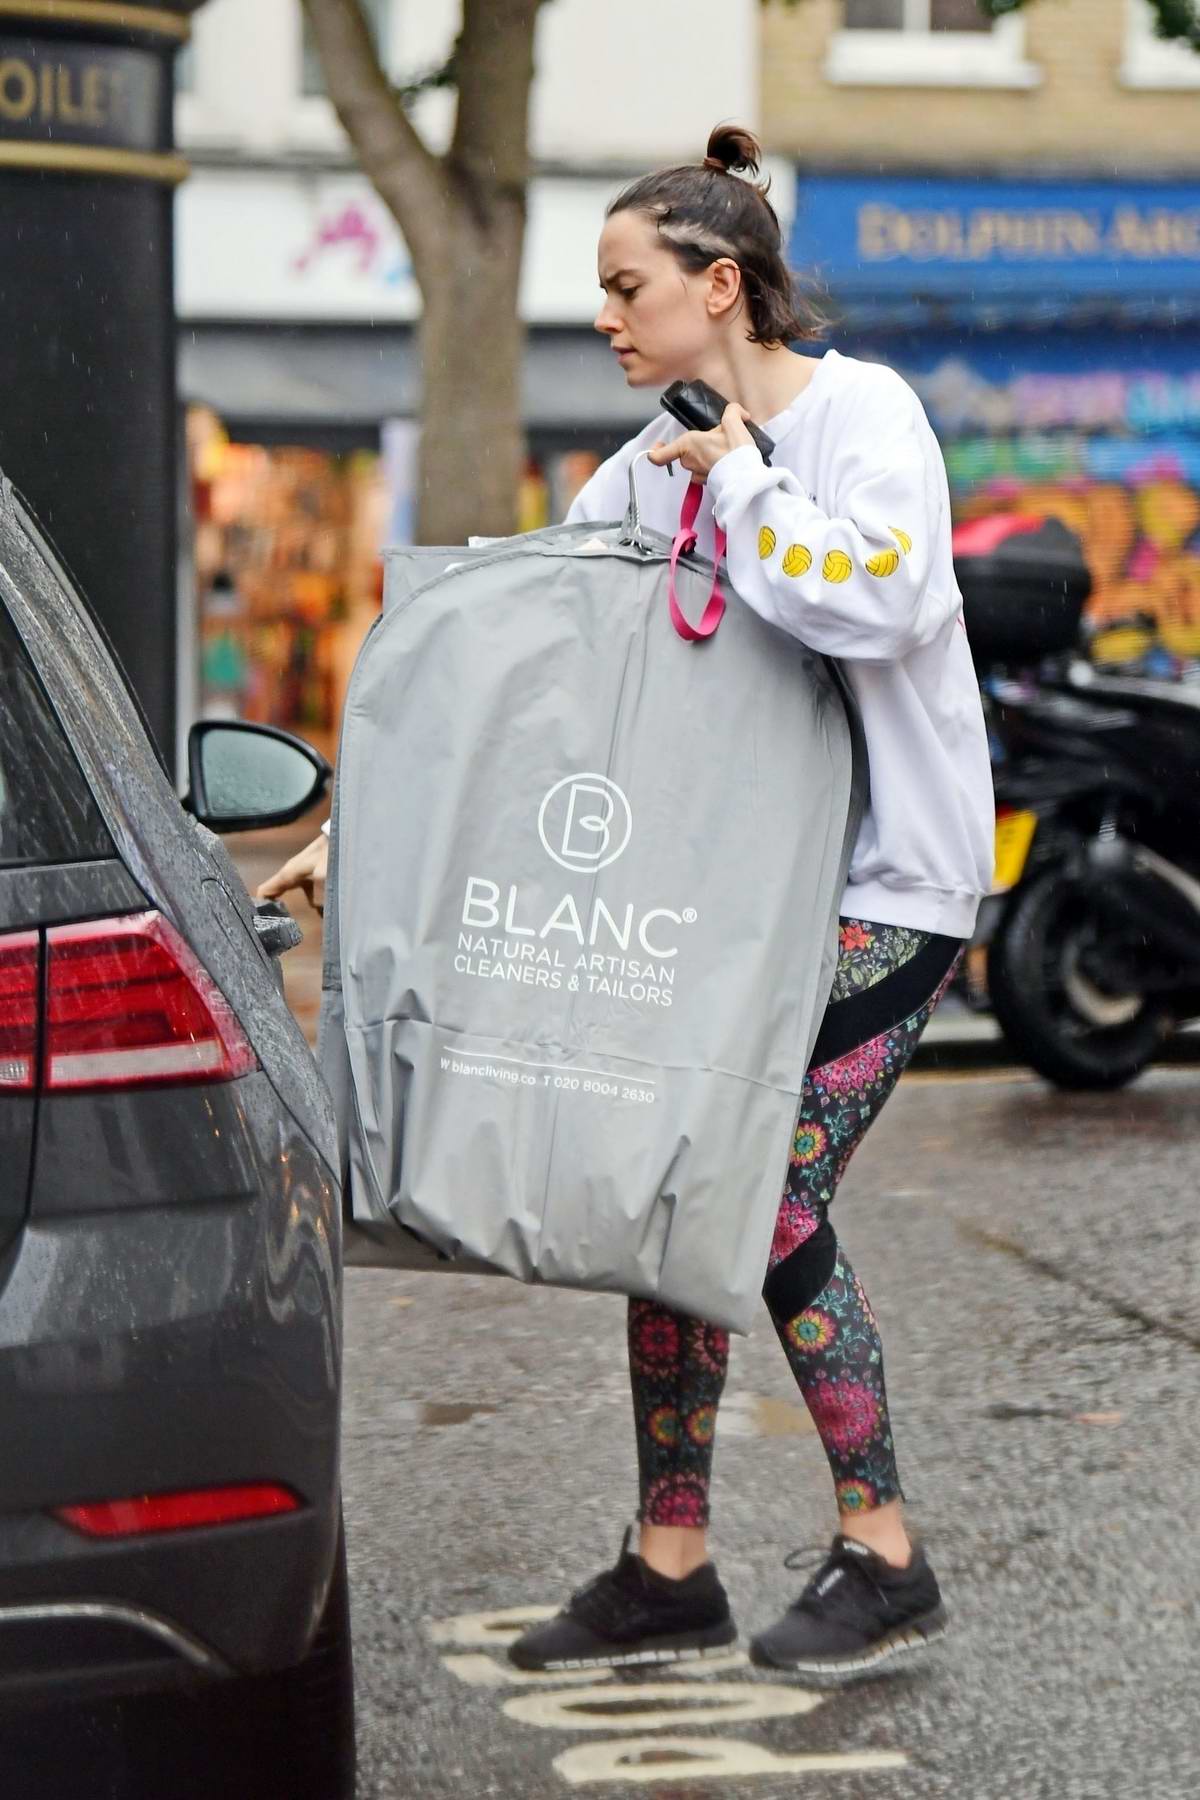 Daisy Ridley wears a white sweatshirt and colorful leggings while